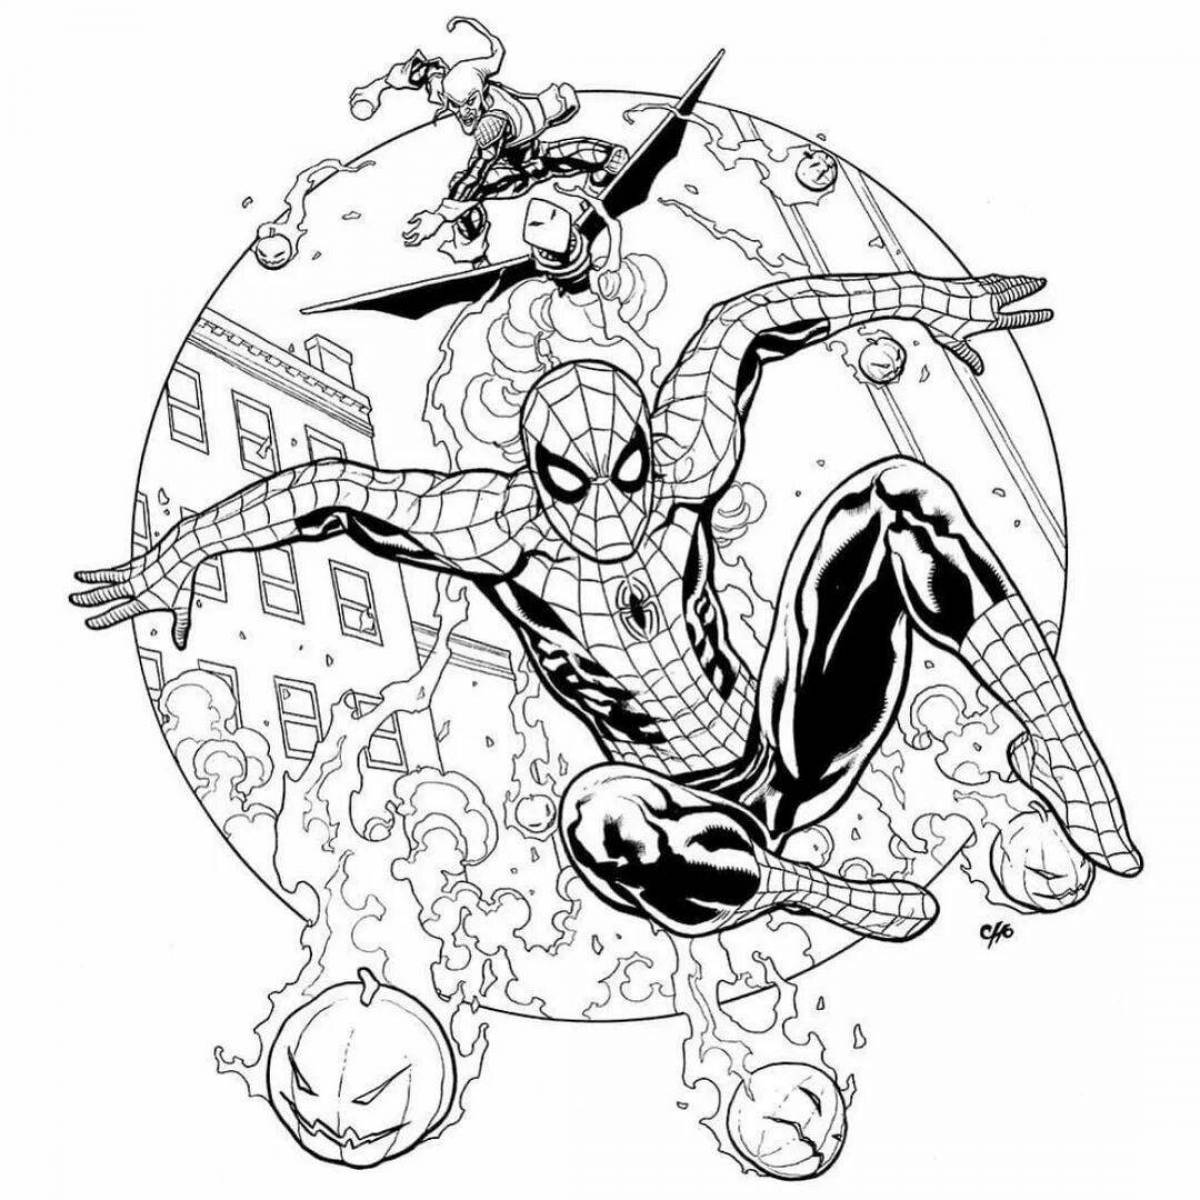 Amazing Spiderman and Goblin coloring book